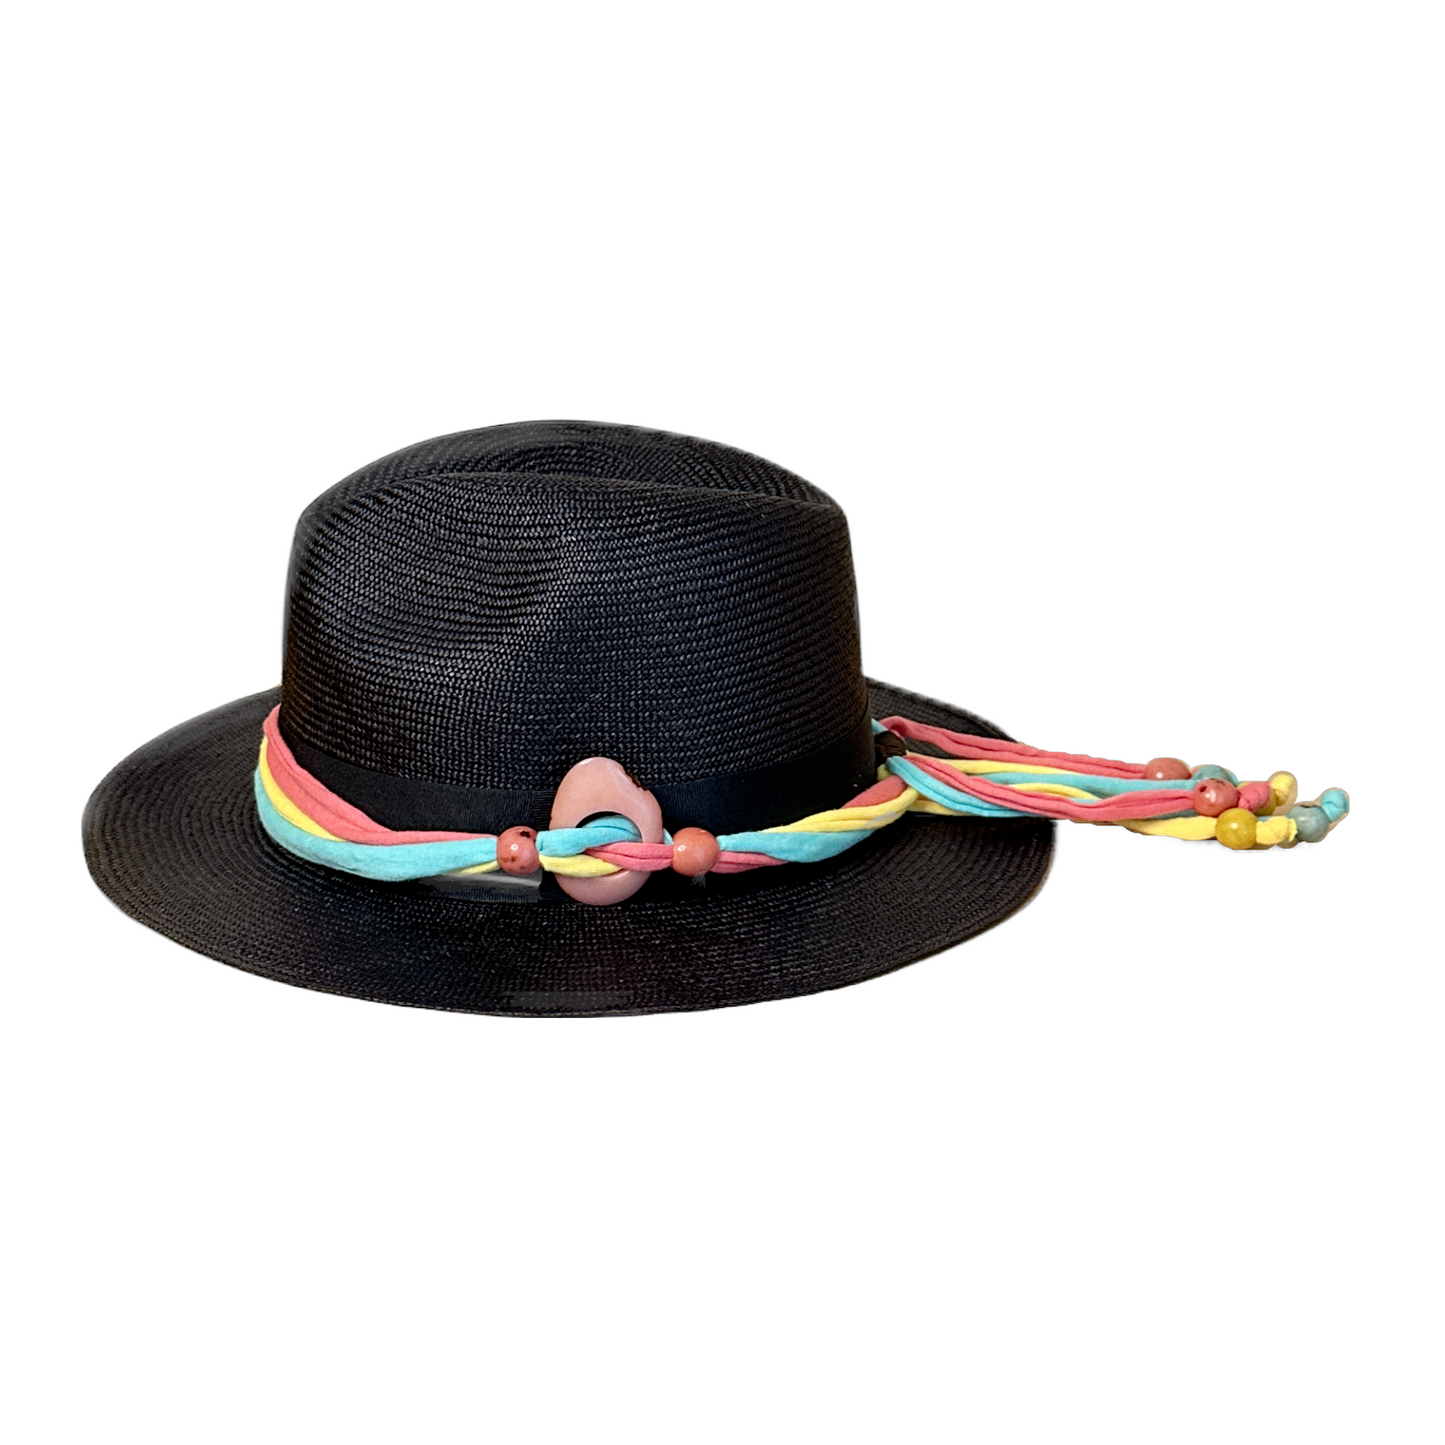 Cotton and Tagua Nut Hat Band - The Hip Hat 